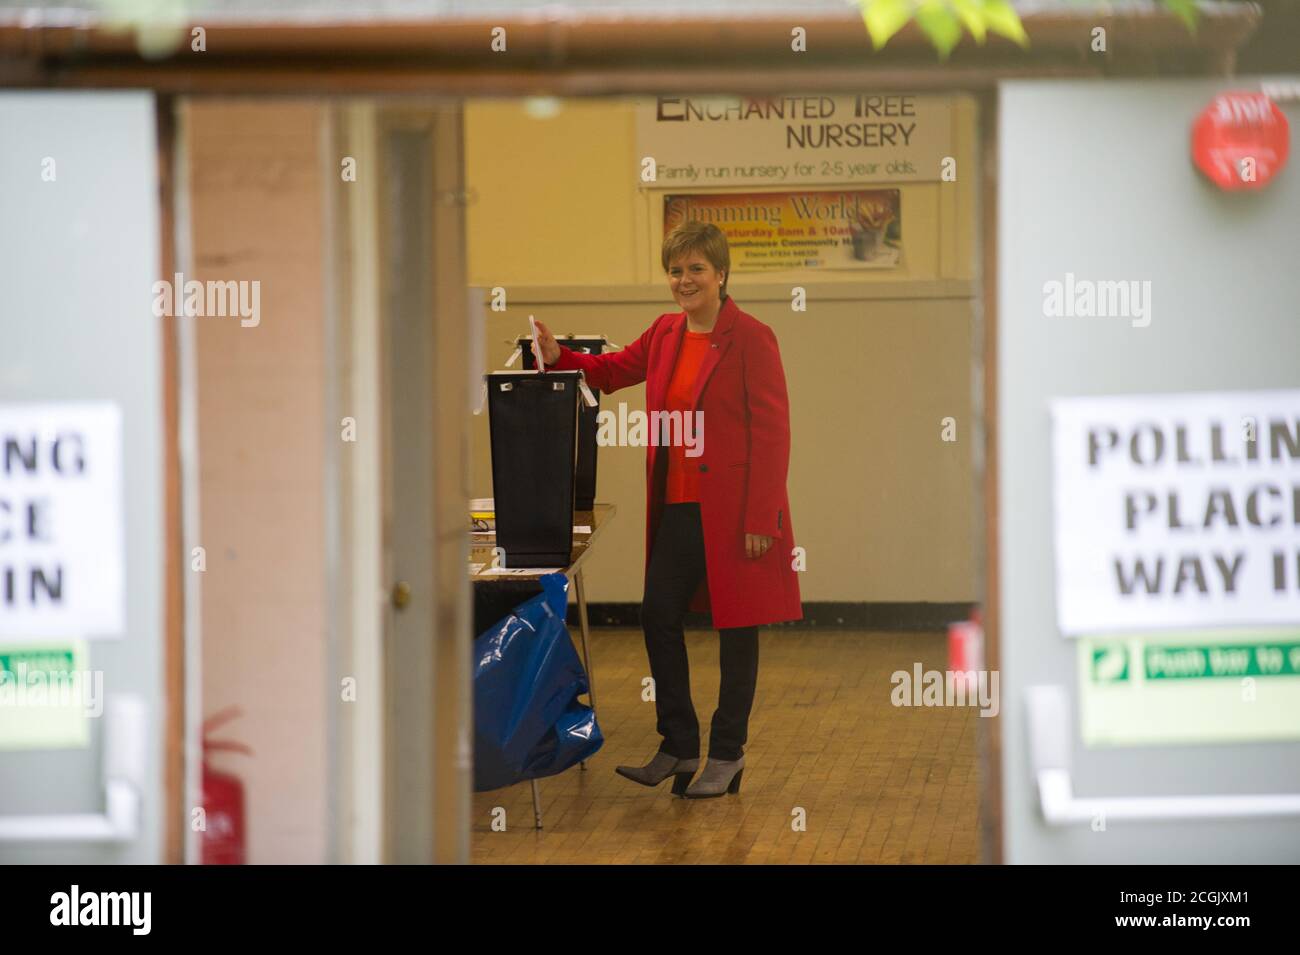 Uddingston, Scotland, UK.  Pictured: Nicola Sturgeon - First Minister of Scotland and Leader of the Scottish National Party (SNP) visiting her local polling station to cast her vote in the European Elections for the SNP to keep Scotland in Europe. Credit: Colin Fisher/Alamy Live News. Stock Photo